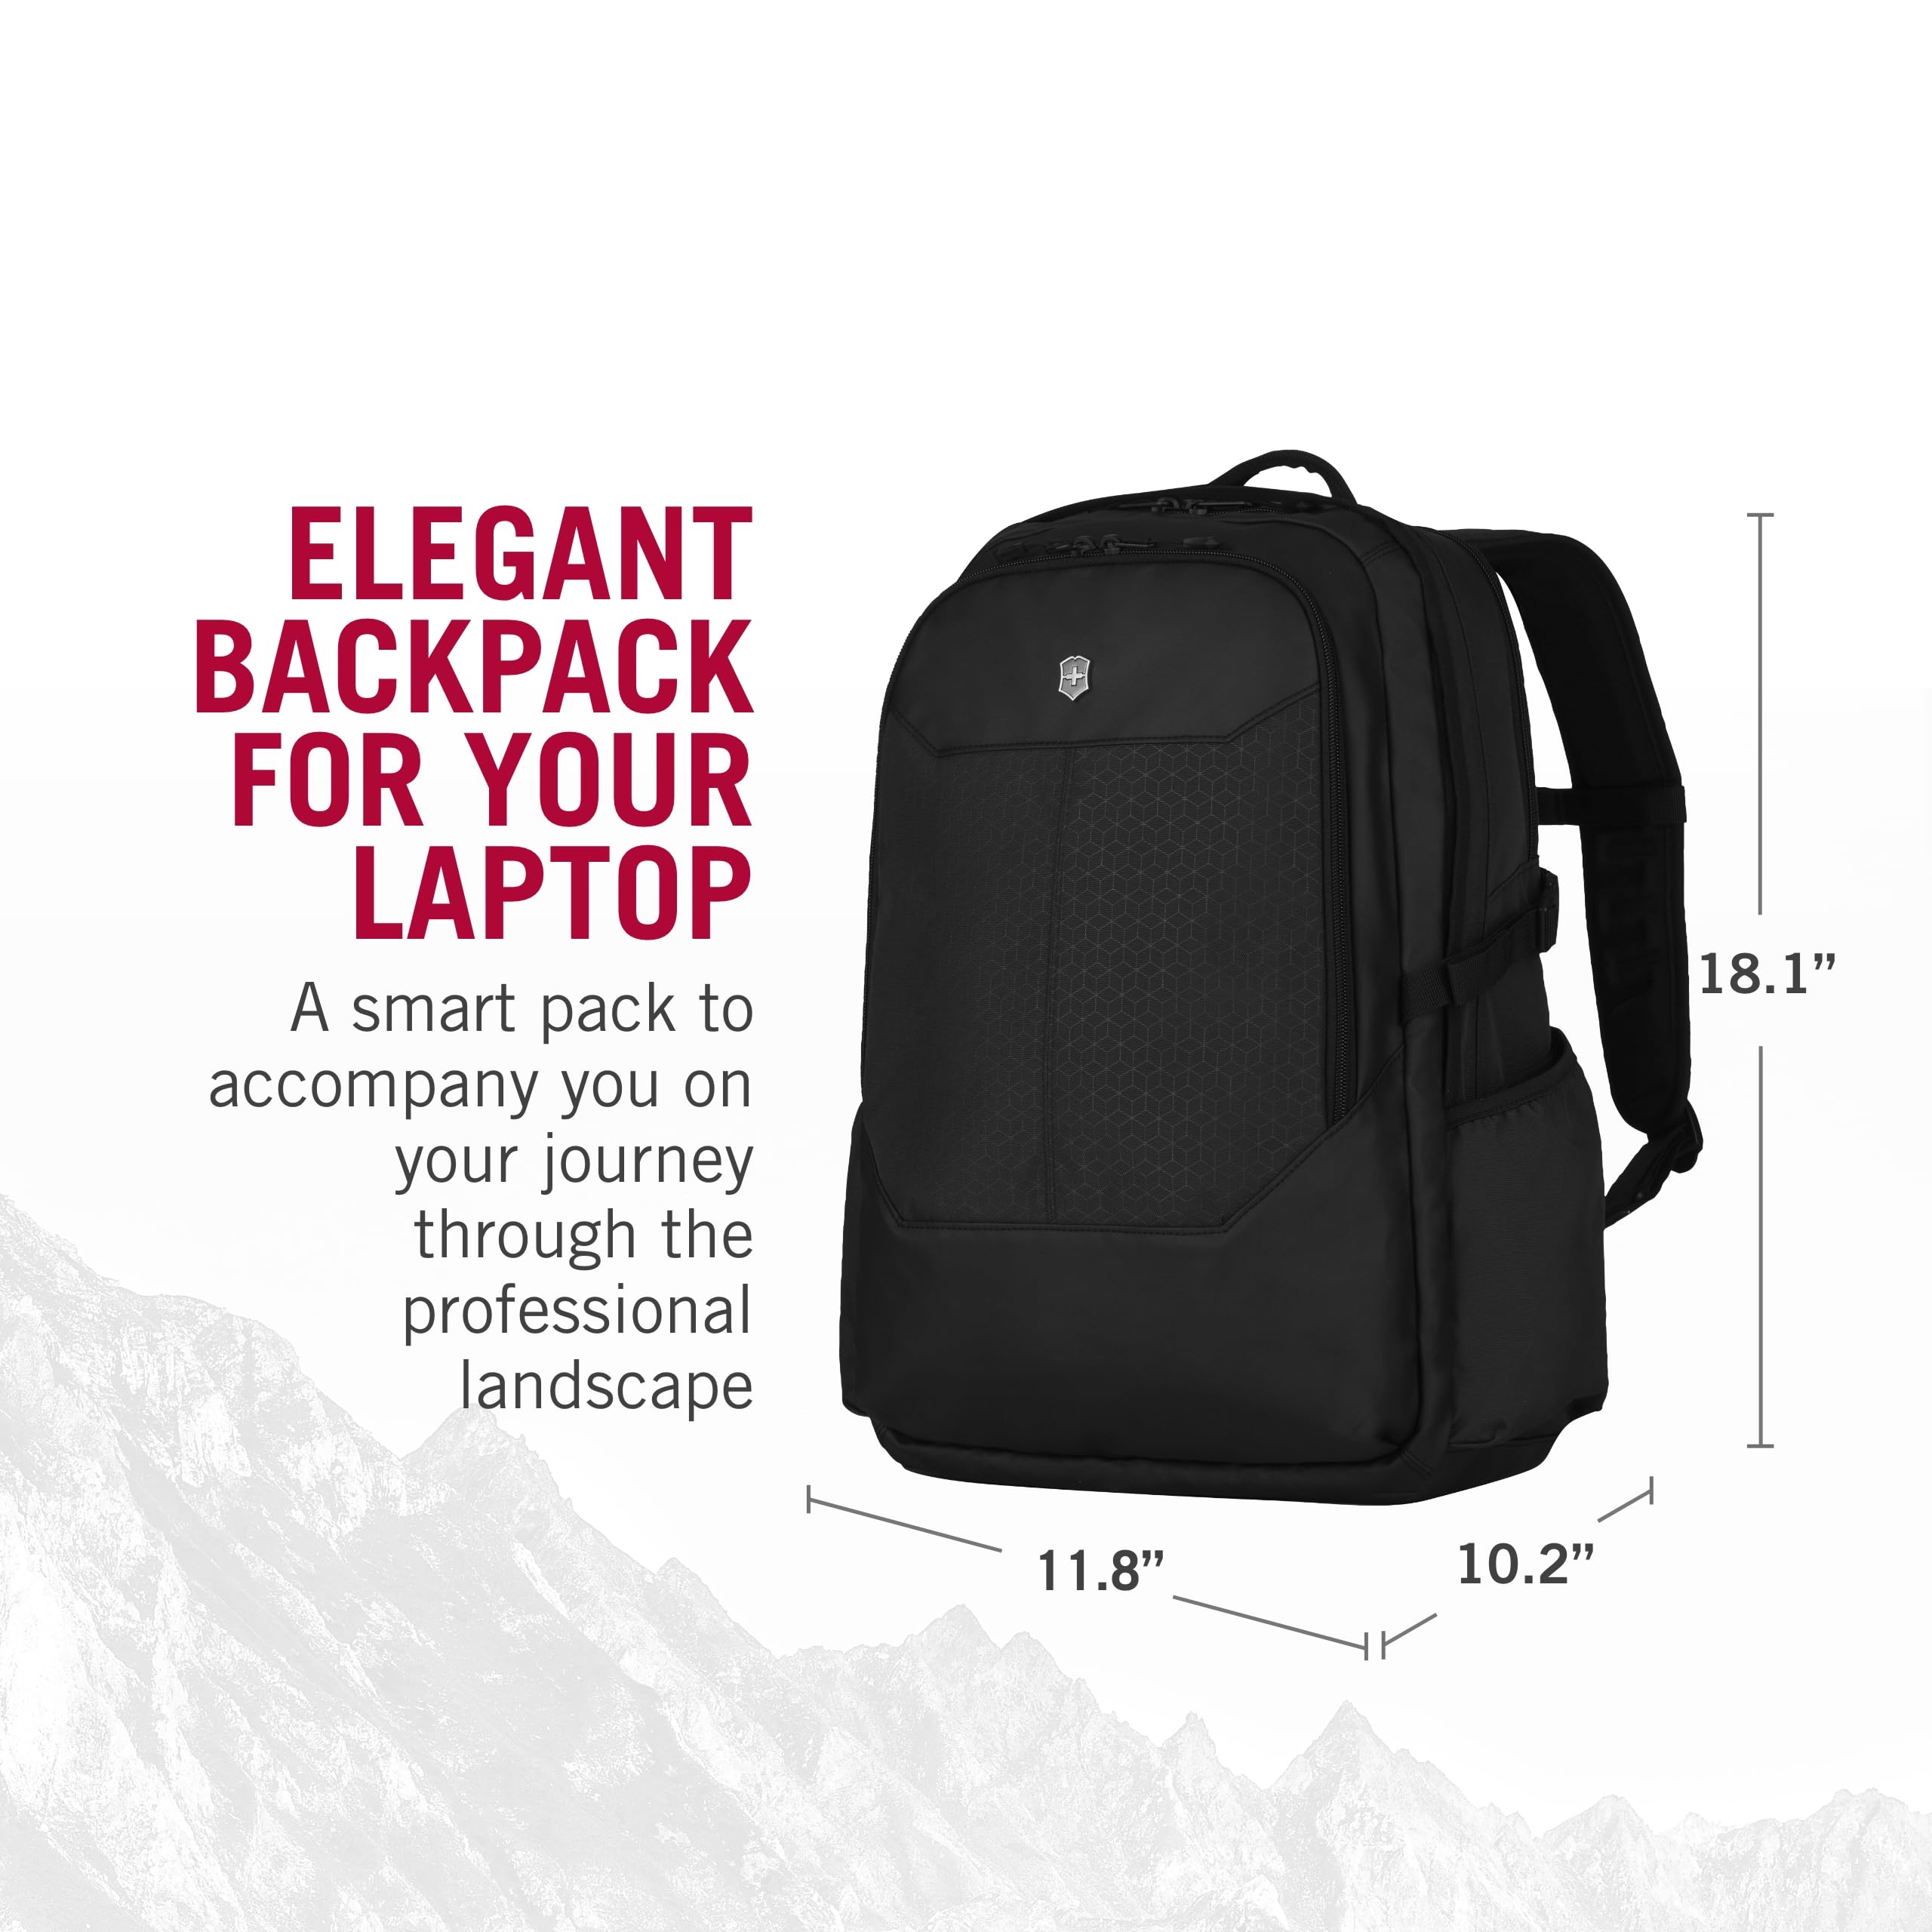 Victorinox Altmont Original Deluxe Laptop Backpack with Waist Strap - Computer Backpack to Hold Travel Accessories - Durable, Lightweight Backpack - 25 Liters, Black